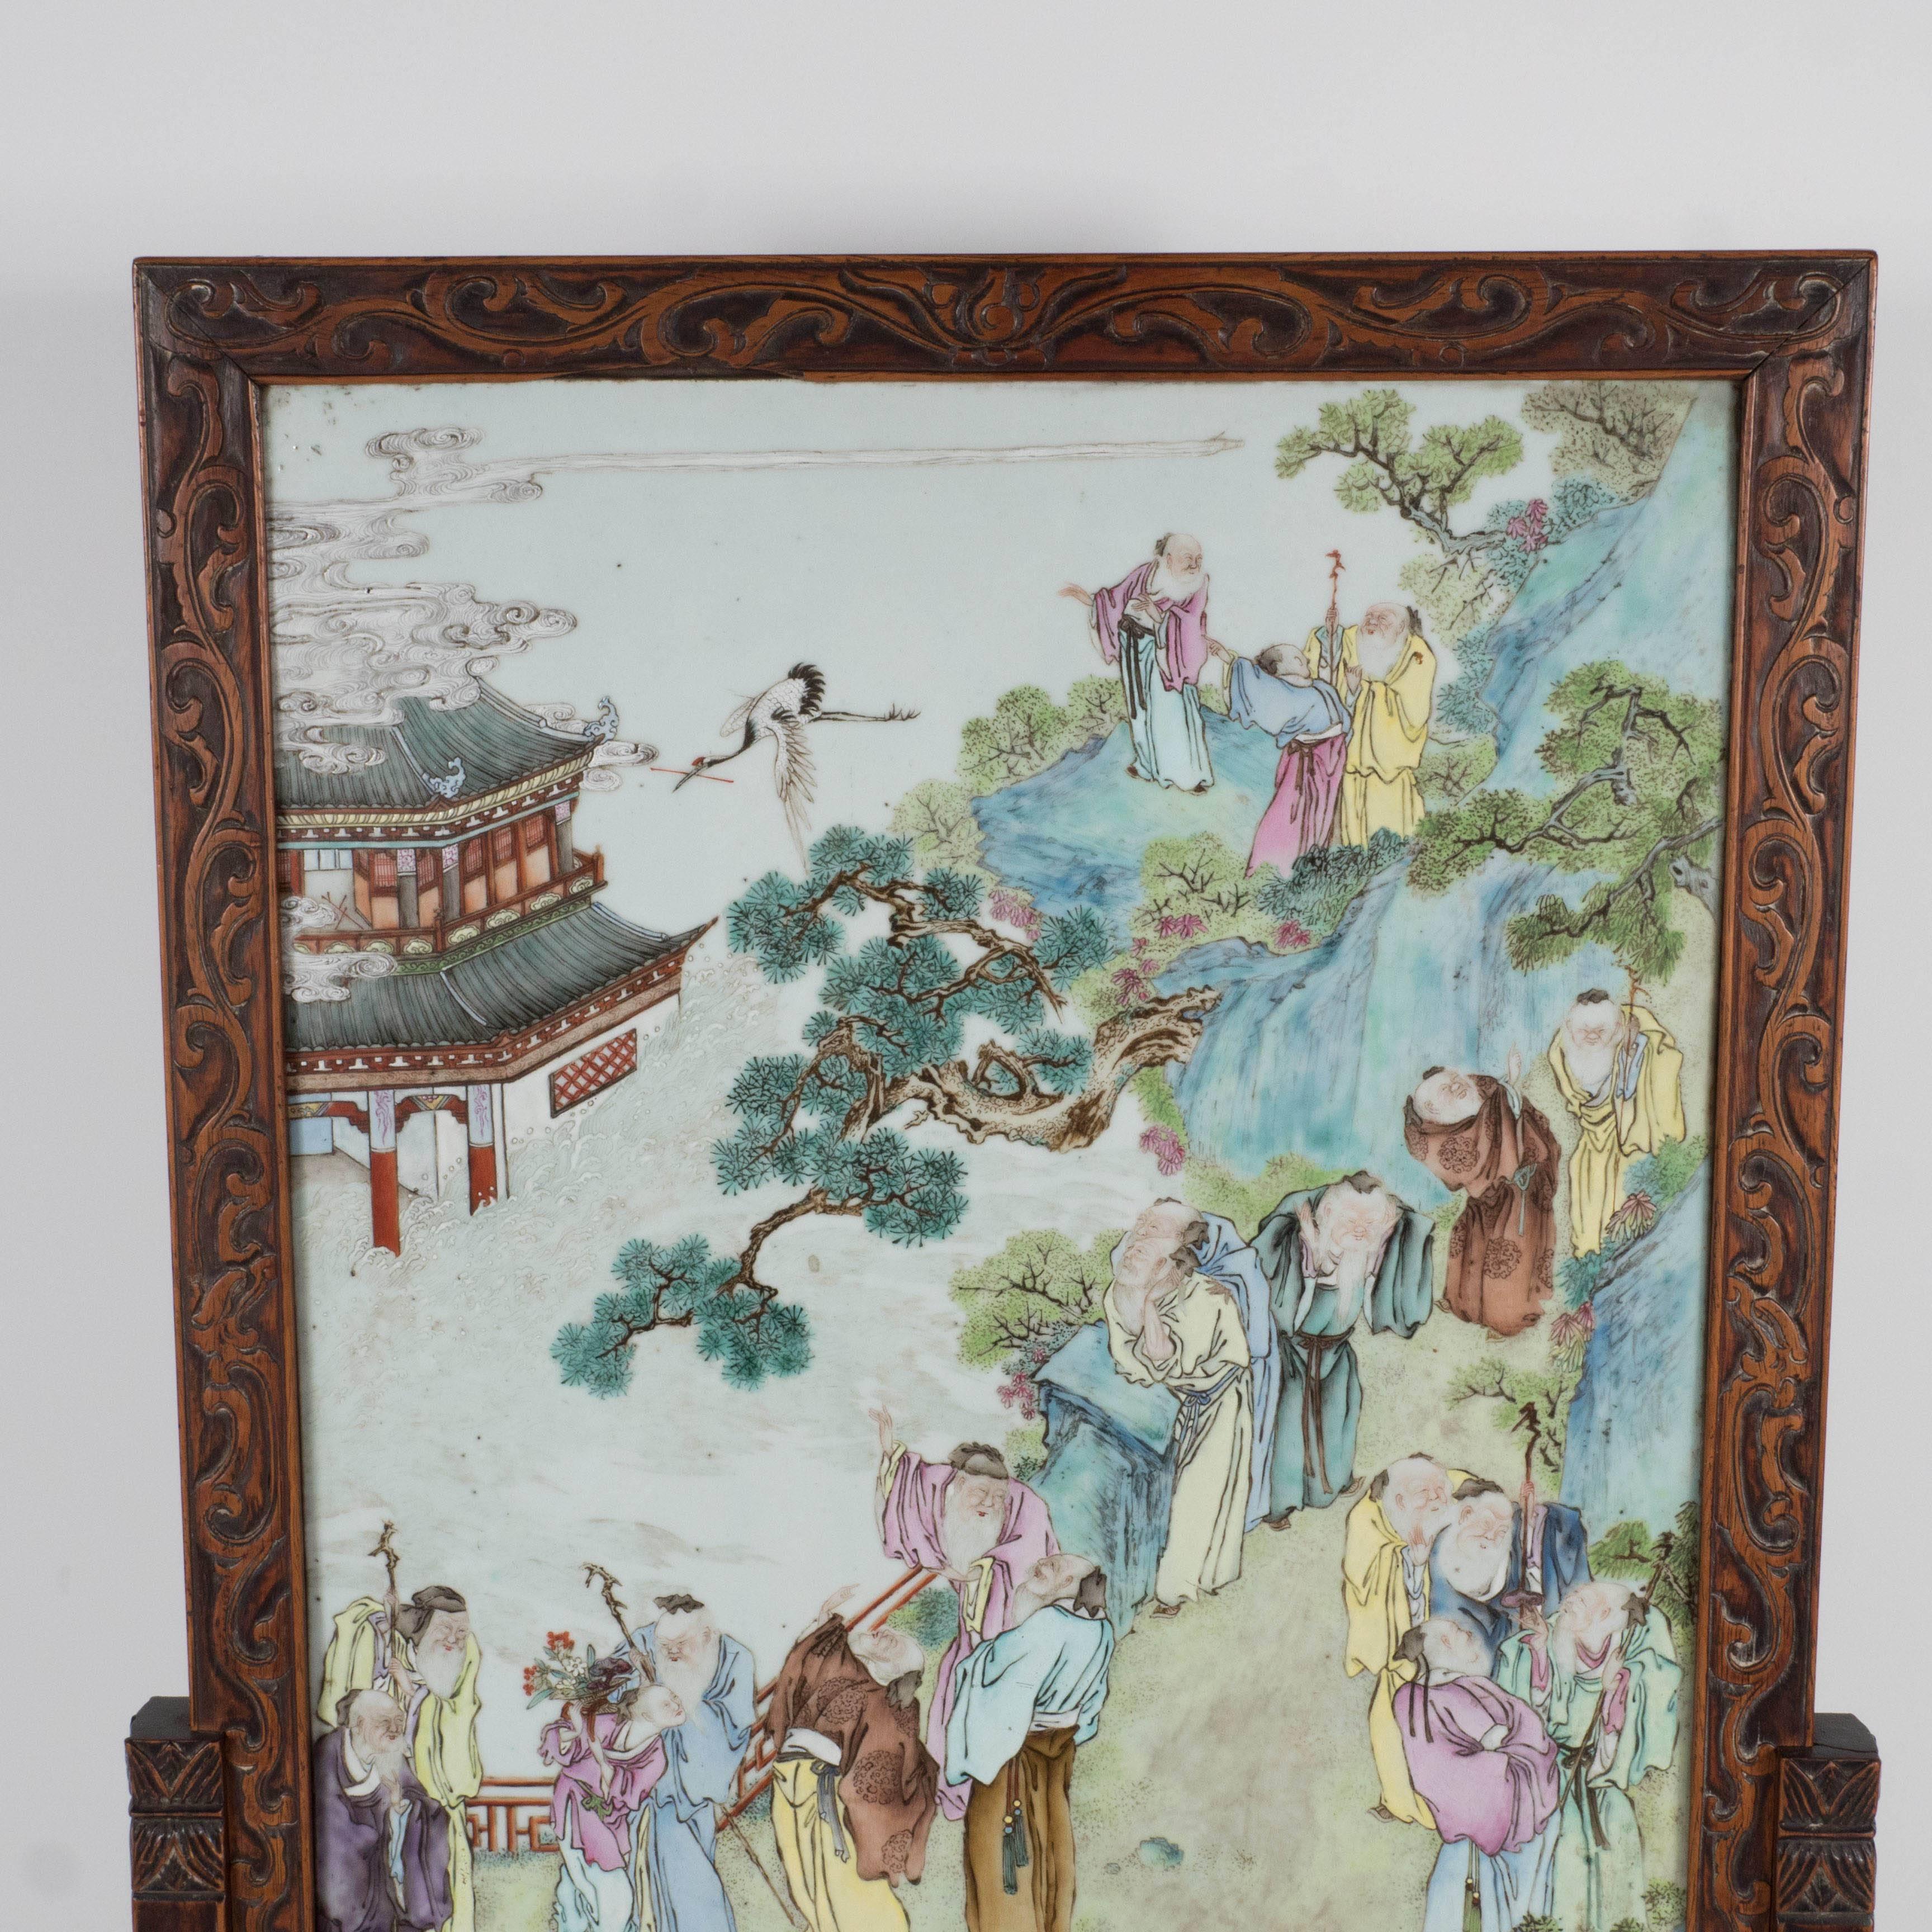 This exquisite table screen is made of hand-carved rosewood framing an elaborate Chinese export porcelain panel of a Chinese court scene. The rosewood frame features a meandering border pattern. The export porcelain panel is hand painted and quite